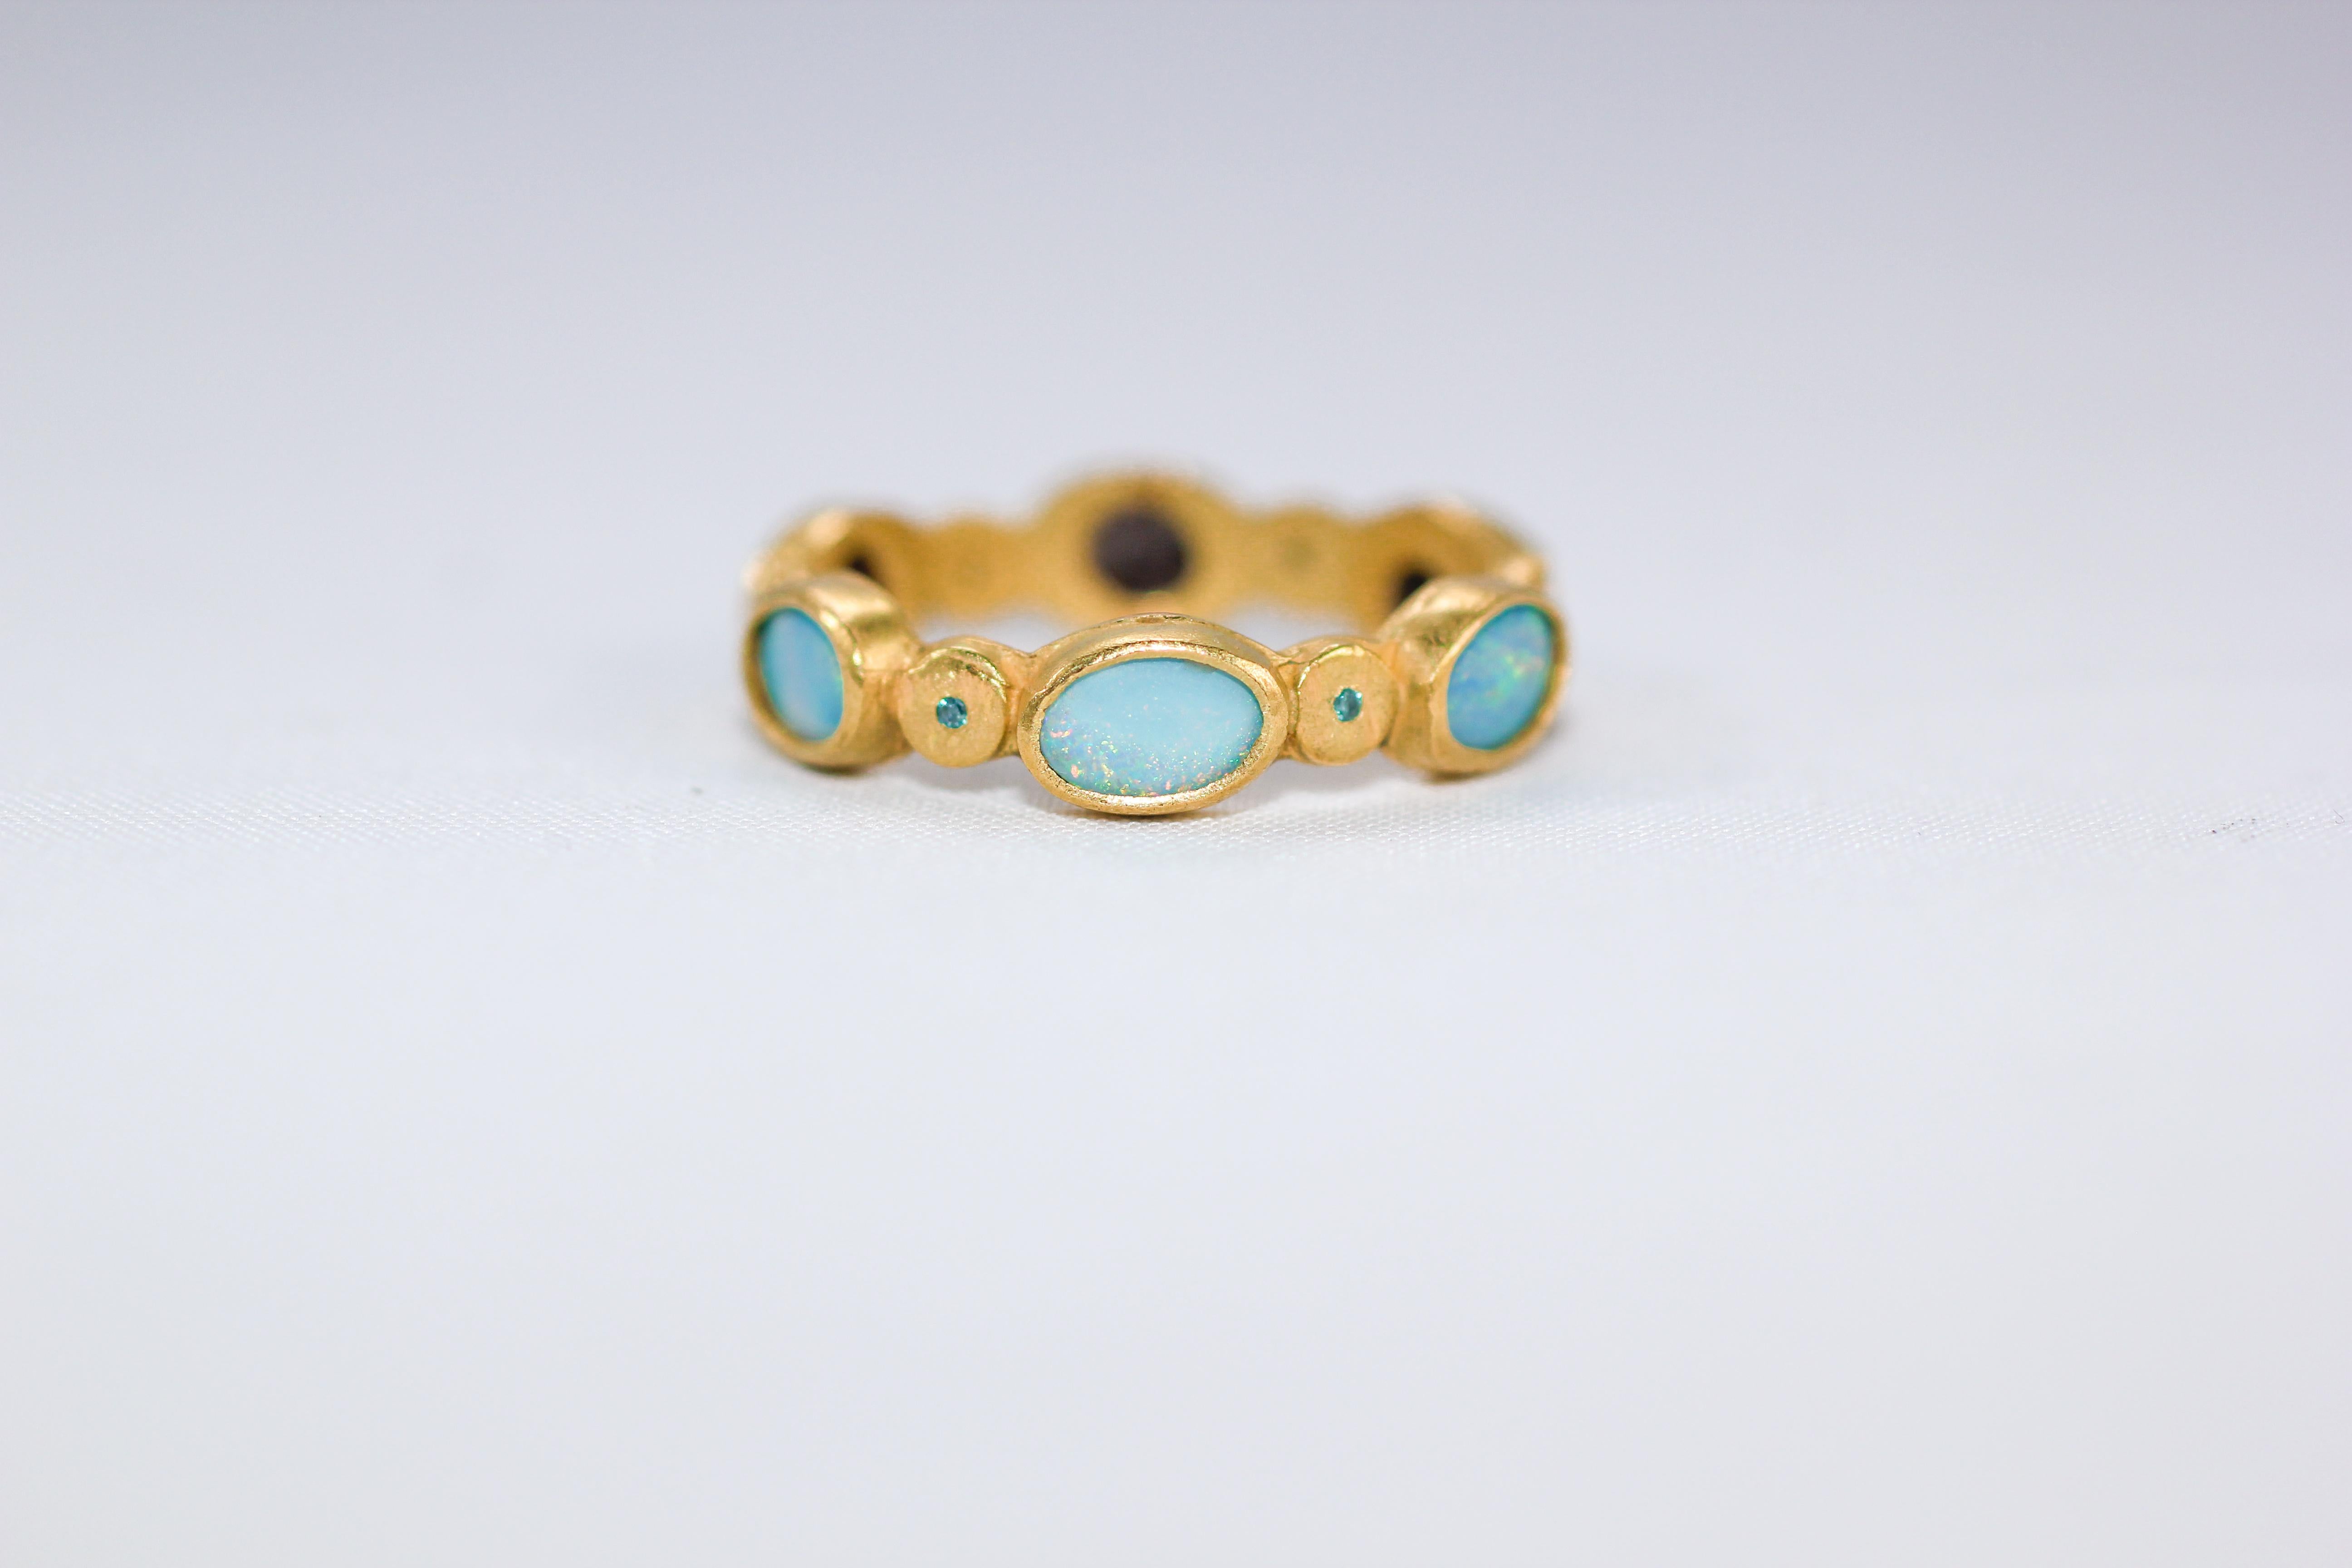 1001 Night: ring #4. One-of-a-kind handmade 18K gold fashion band ring. Rich and exotic Black Opals are bezels set in solid 18k yellow gold and accented with color diamonds, pink sapphire, and Tsavorite garnet creating a bright and interesting